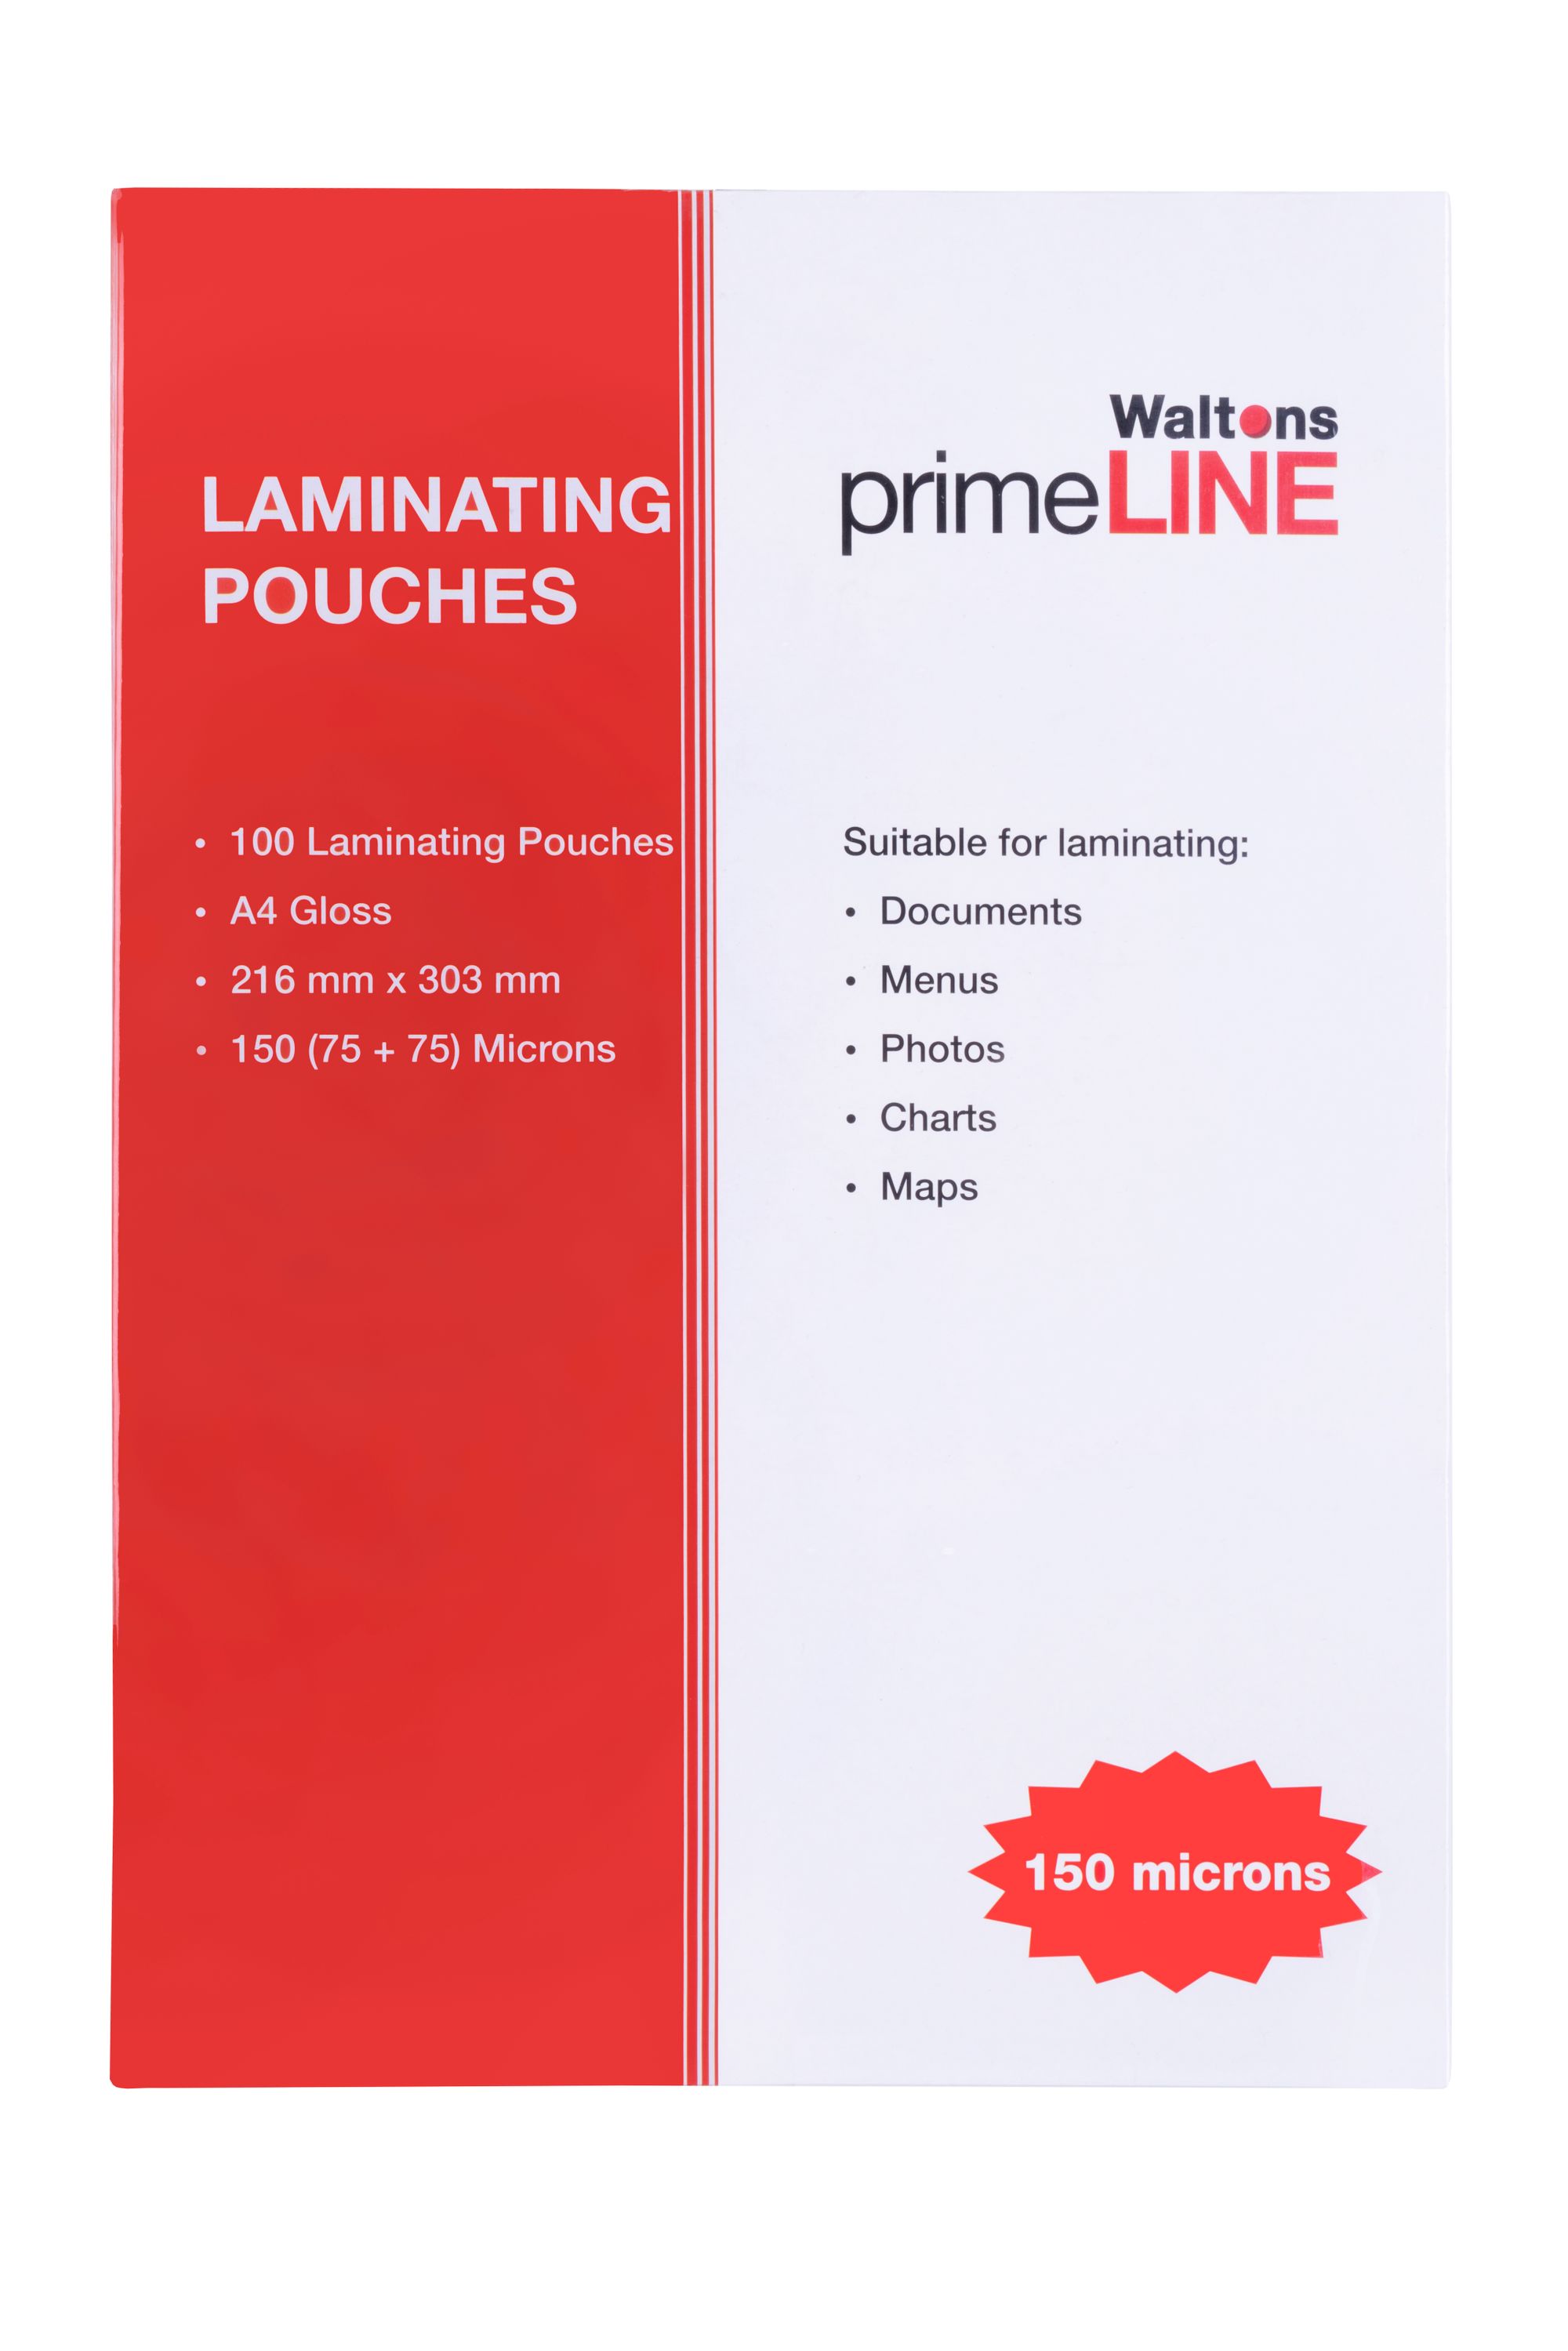 https://content.storefront7.co.za/stores/za.co.storefront7.waltonsb2c/products/951531/pictures/waltons-primeline-laminating-pouch-a4-150mic-100-pack-951531_zqbv.jpg?format=jpg